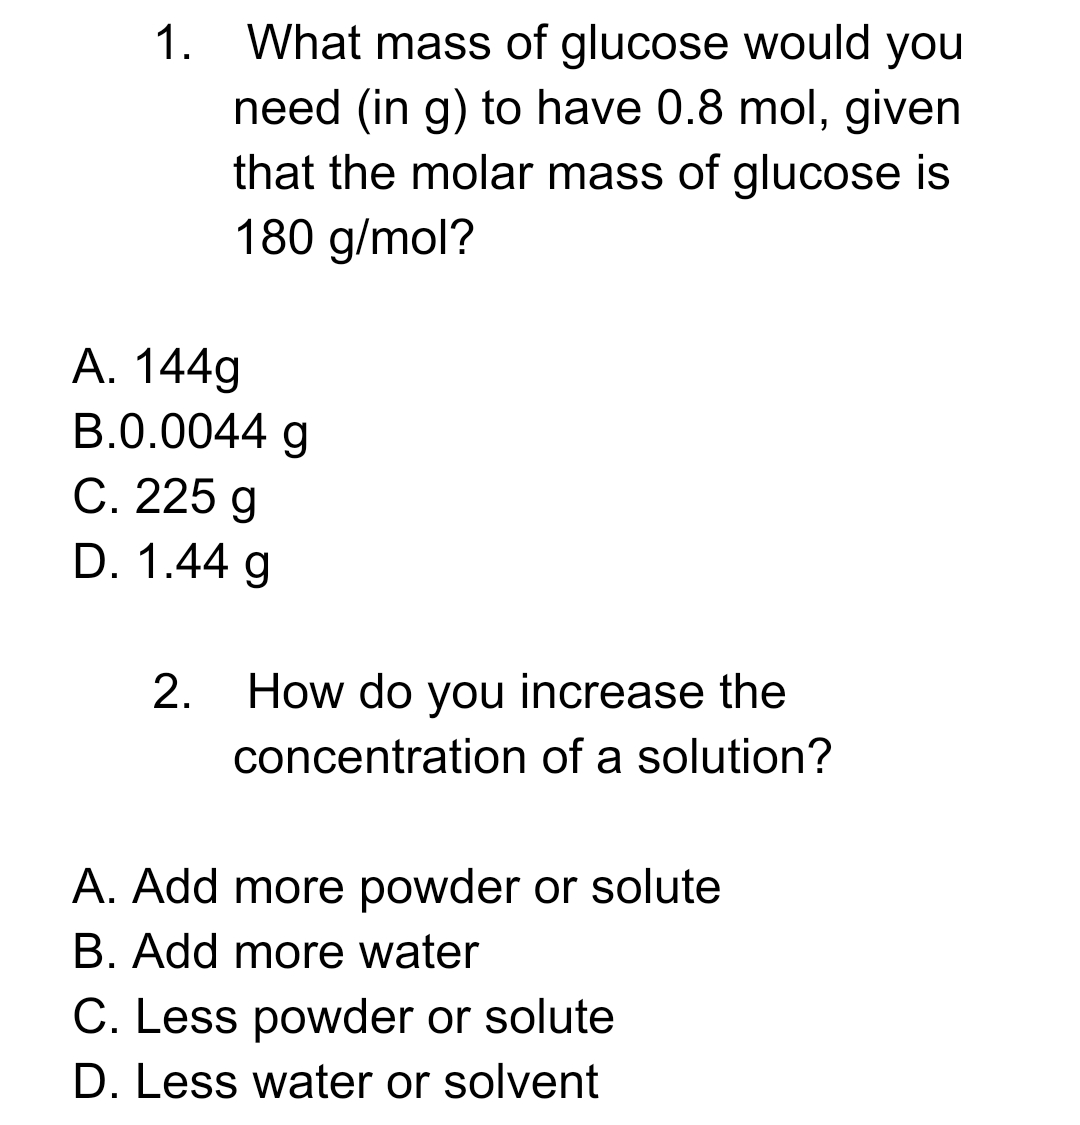 What mass of glucose would you
need (in g) to have 0.8 mol, given
that the molar mass of glucose is
180 g/mol?
1.
A. 144g
B.0.0044 g
С. 225 g
D. 1.44 g
2.
How do you increase the
concentration of a solution?
A. Add more powder or solute
B. Add more water
C. Less powder or solute
D. Less water or solvent
